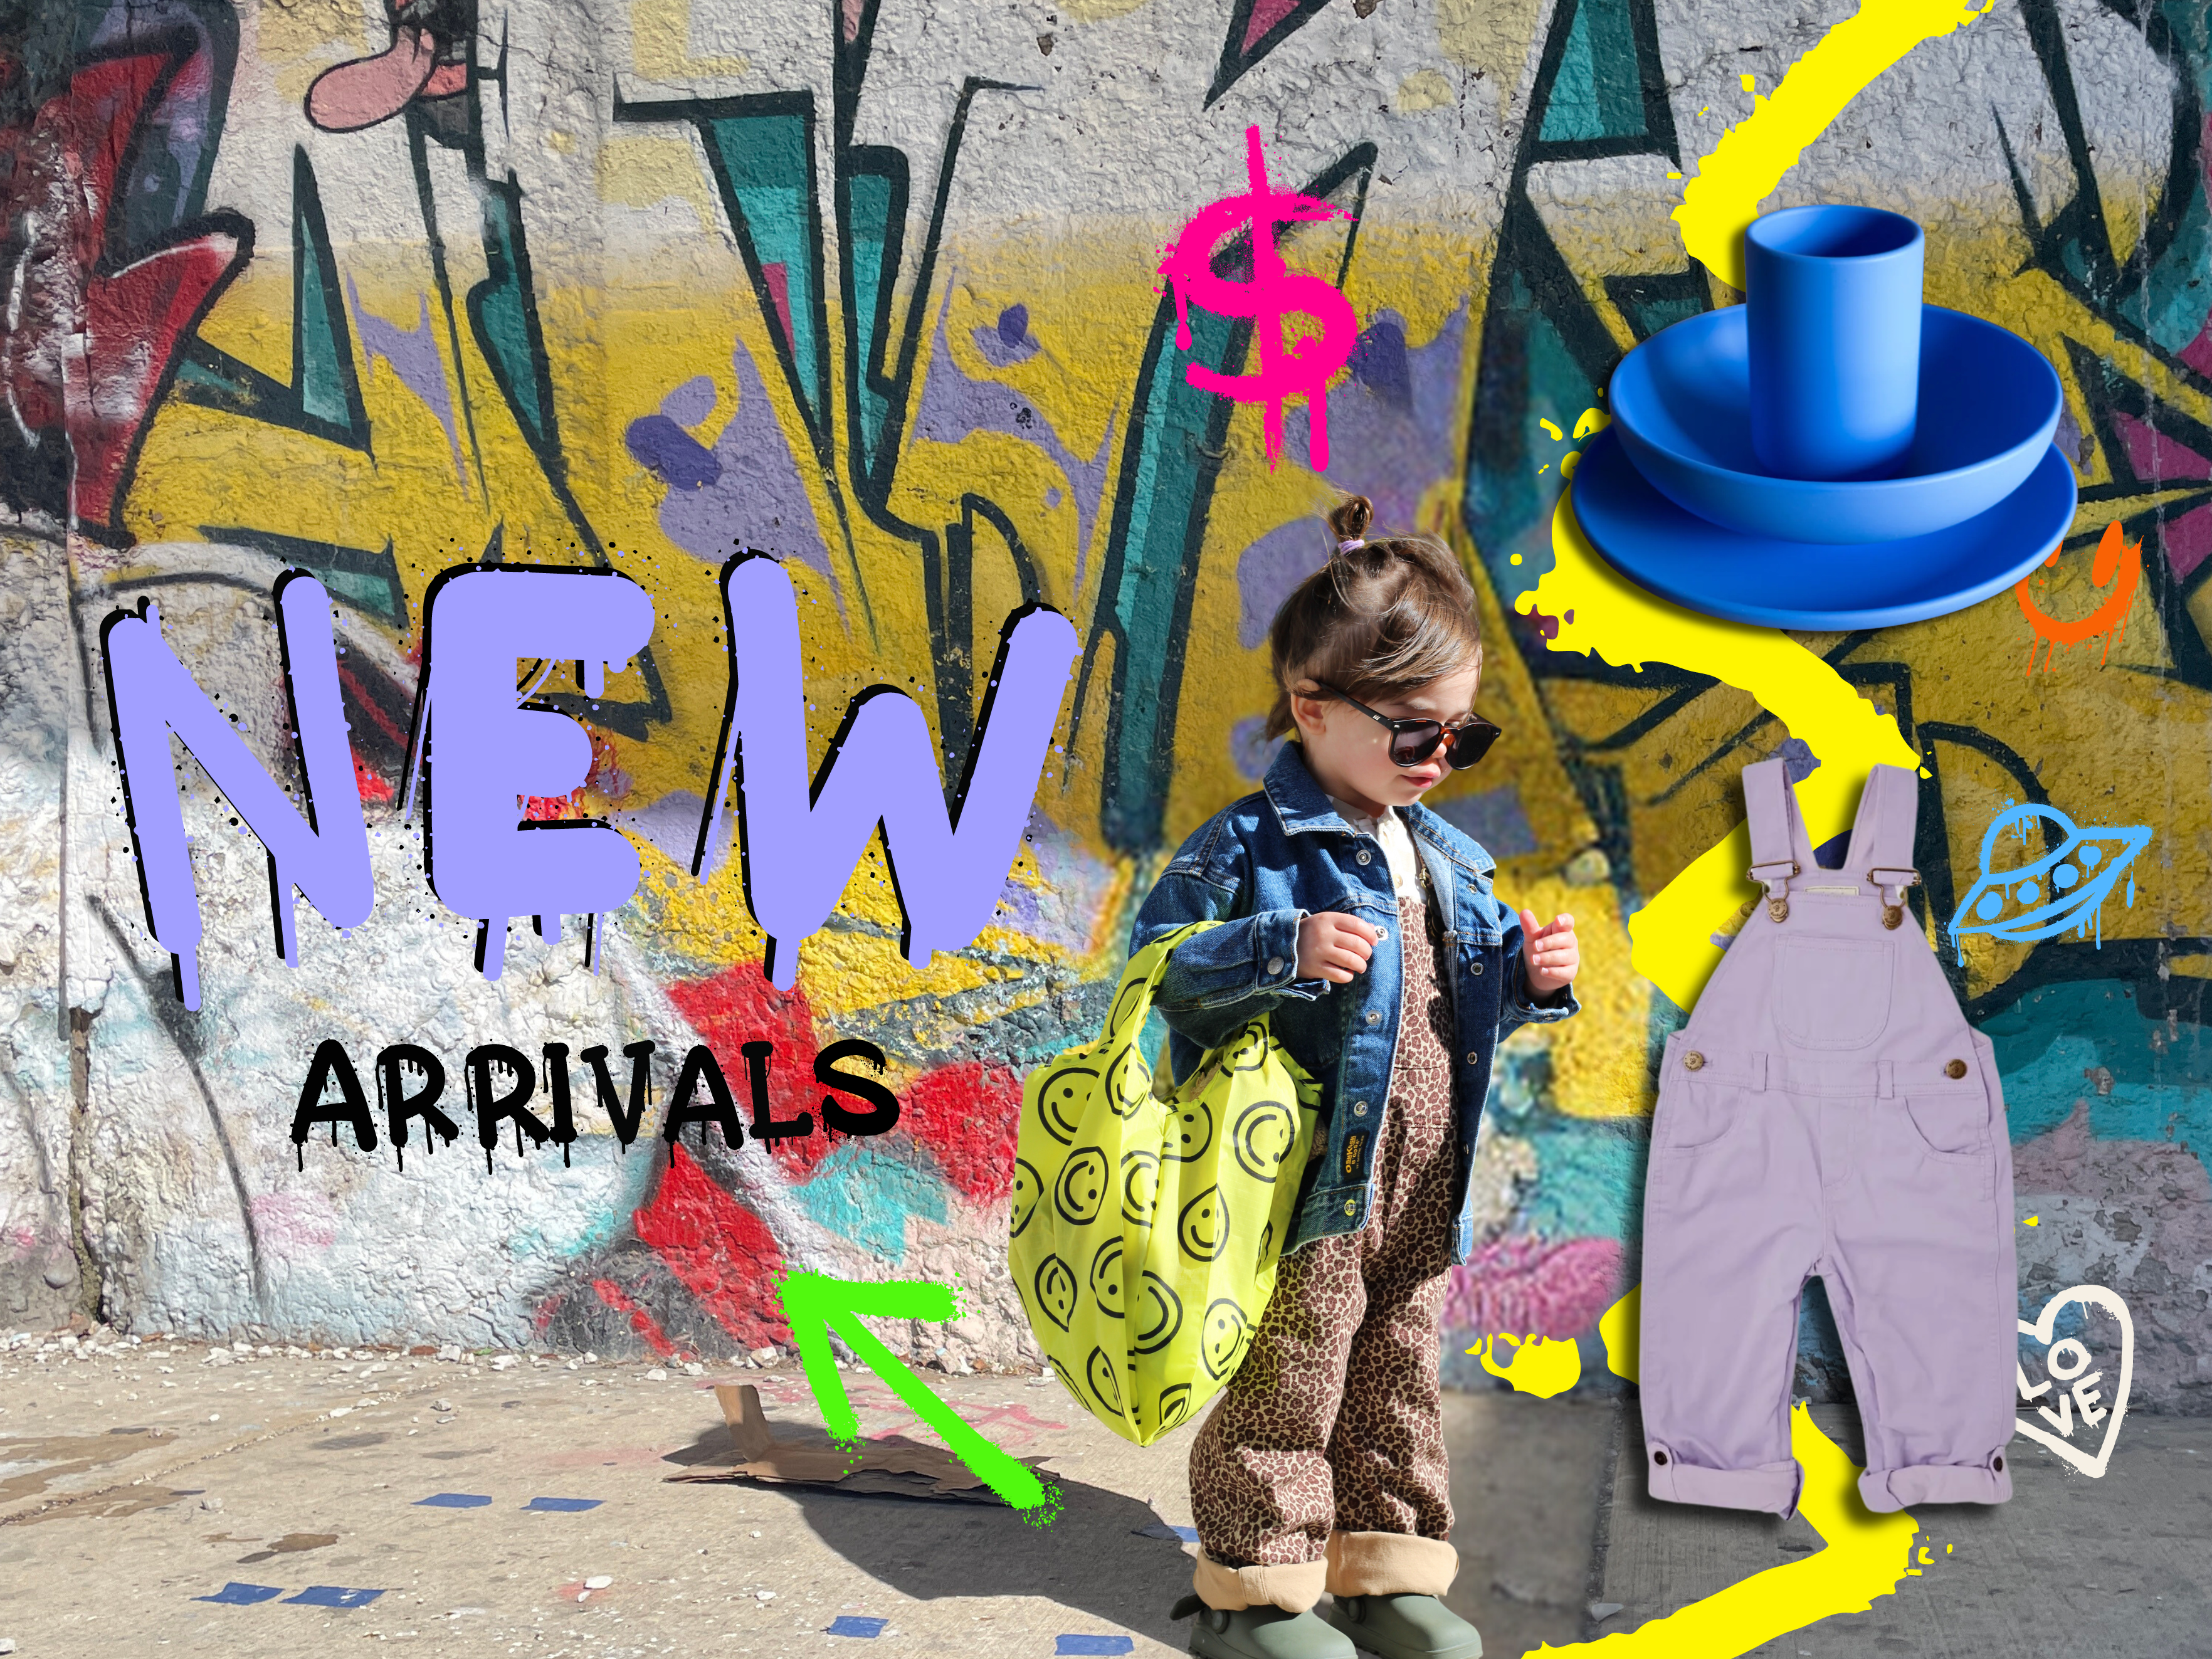 first slideshow image to promote new kids clothing arrivals for spring. A young child about 2 years old stands in front of a colorful graffiti mural holding a reusable bag with smiley faces and wearing a blue denim jacket and leopard overalls. On the right of the screen shows lavender overalls and a cobalt blue silicon dish set and cup. 